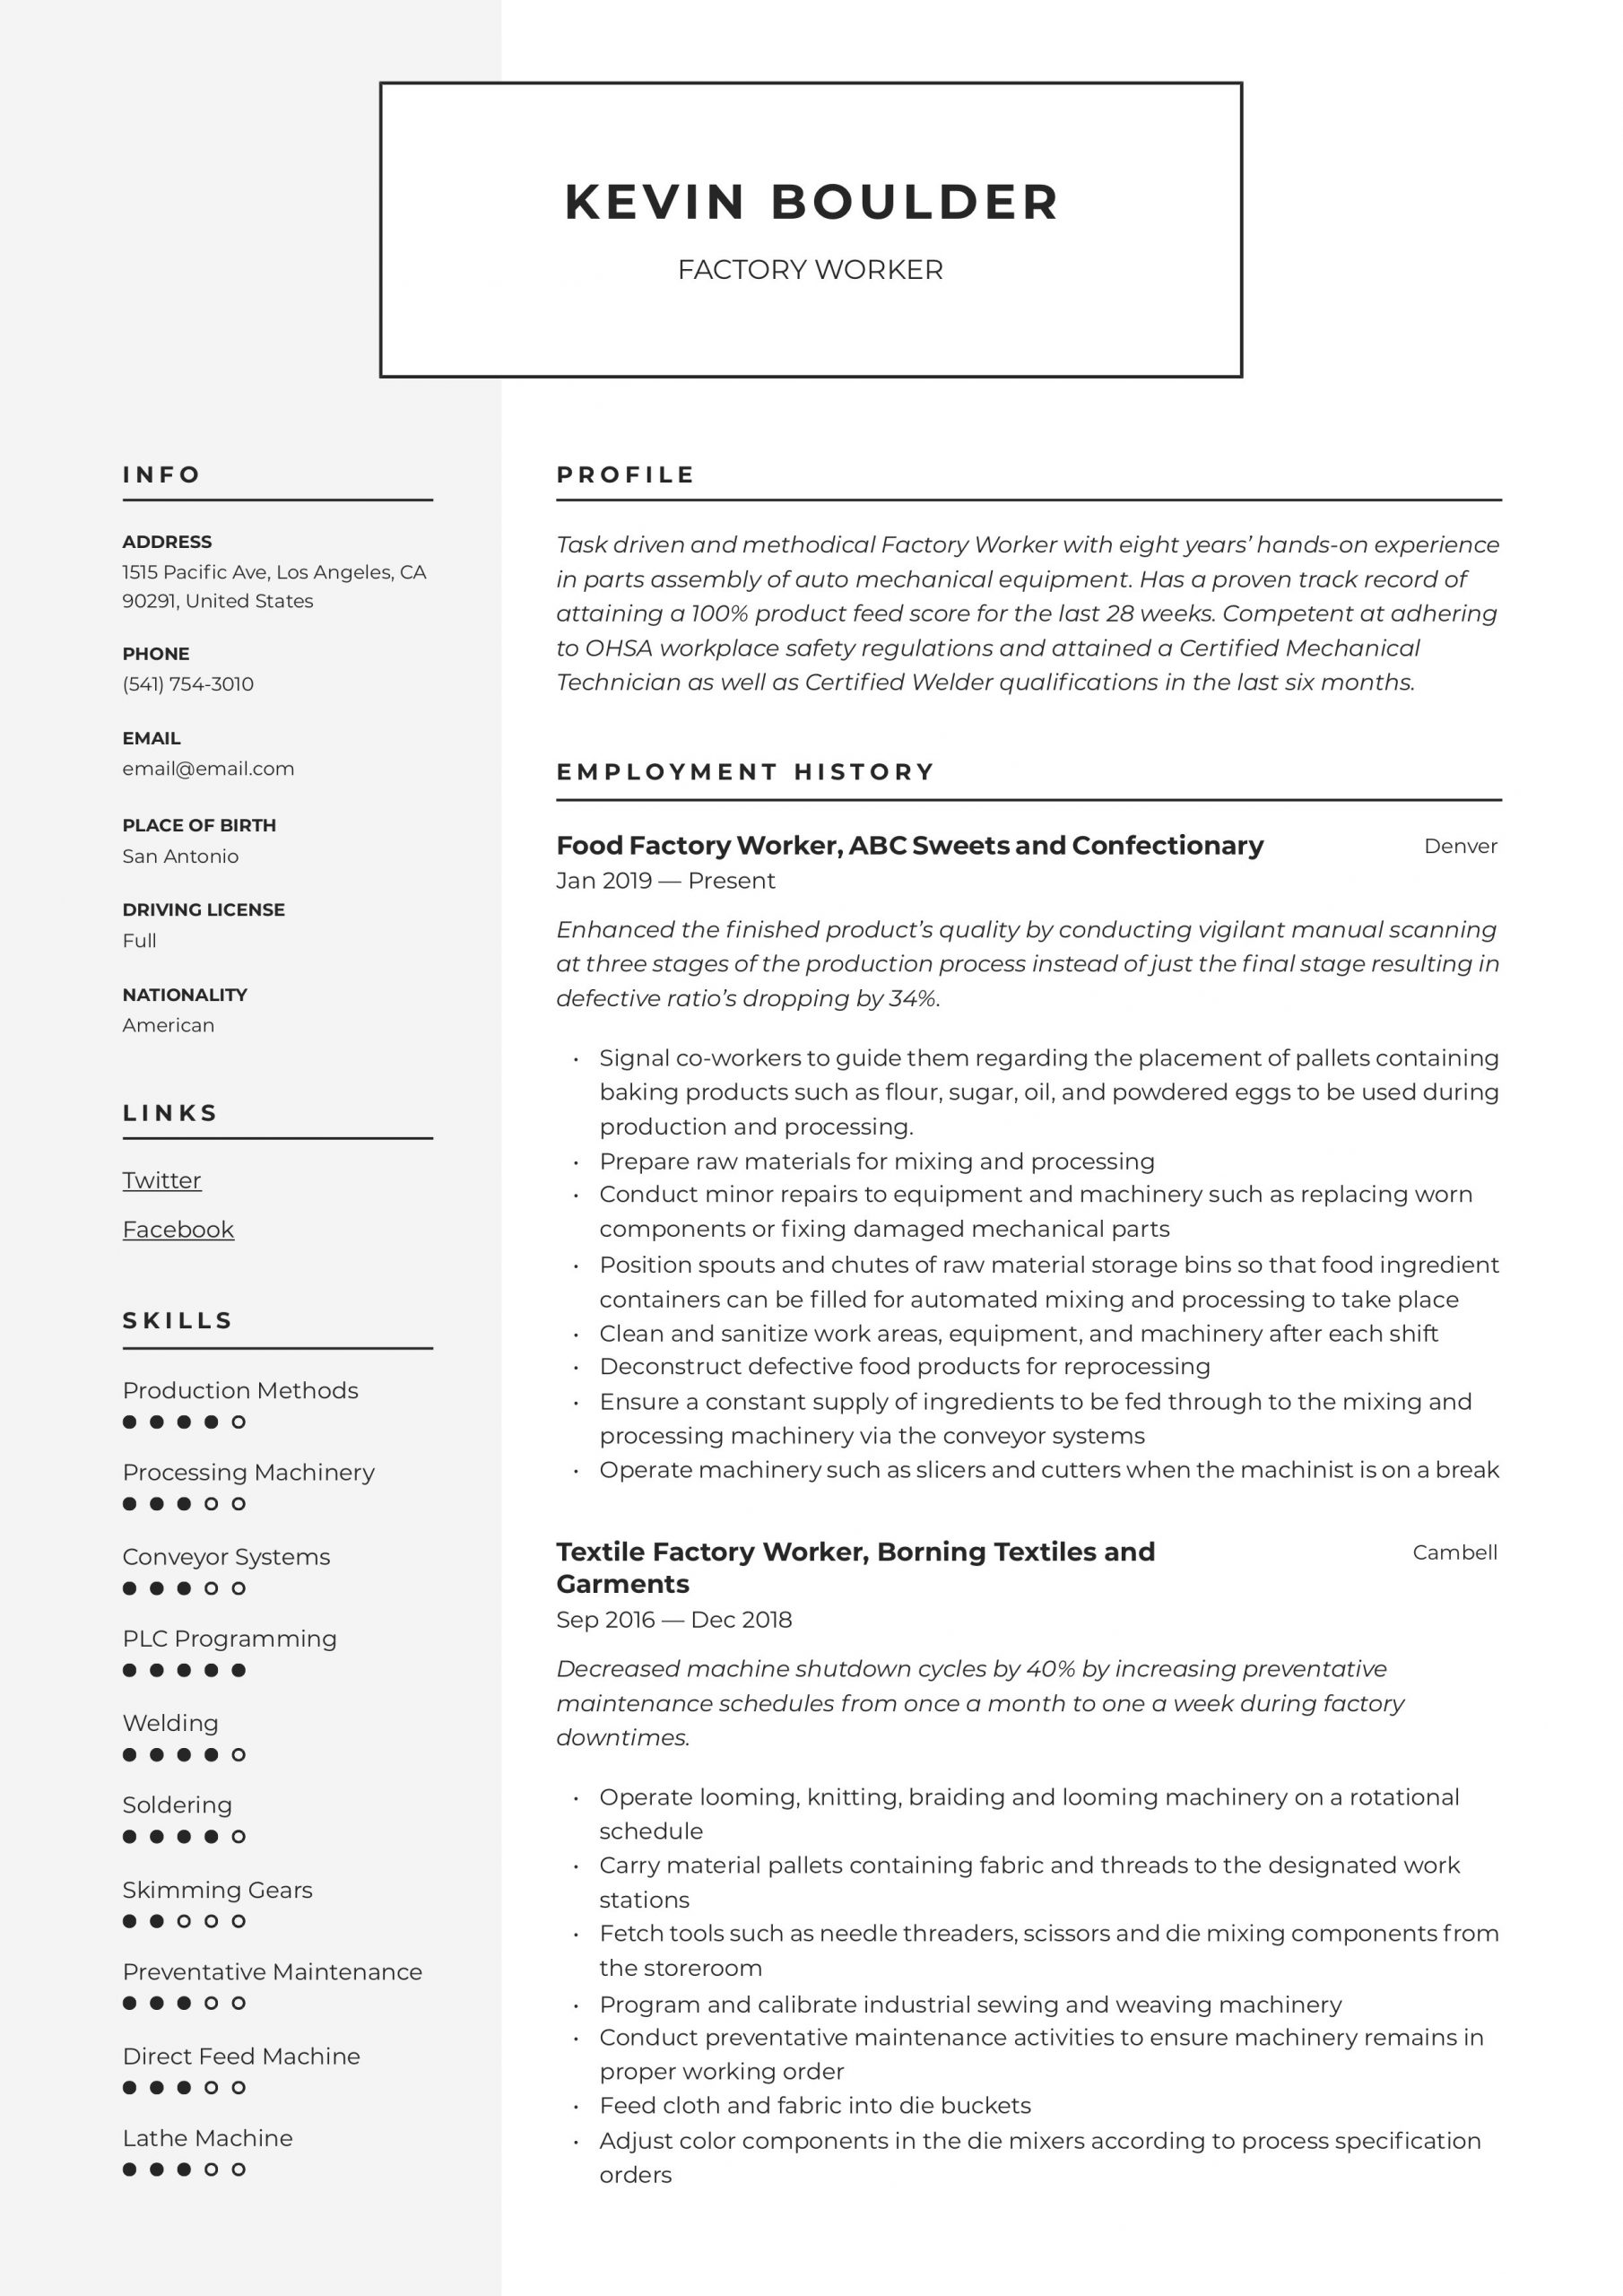 Resume Templates for Oil Field Jobs Factory Worker Resume & Writing Guide  12 Resume Examples 2020